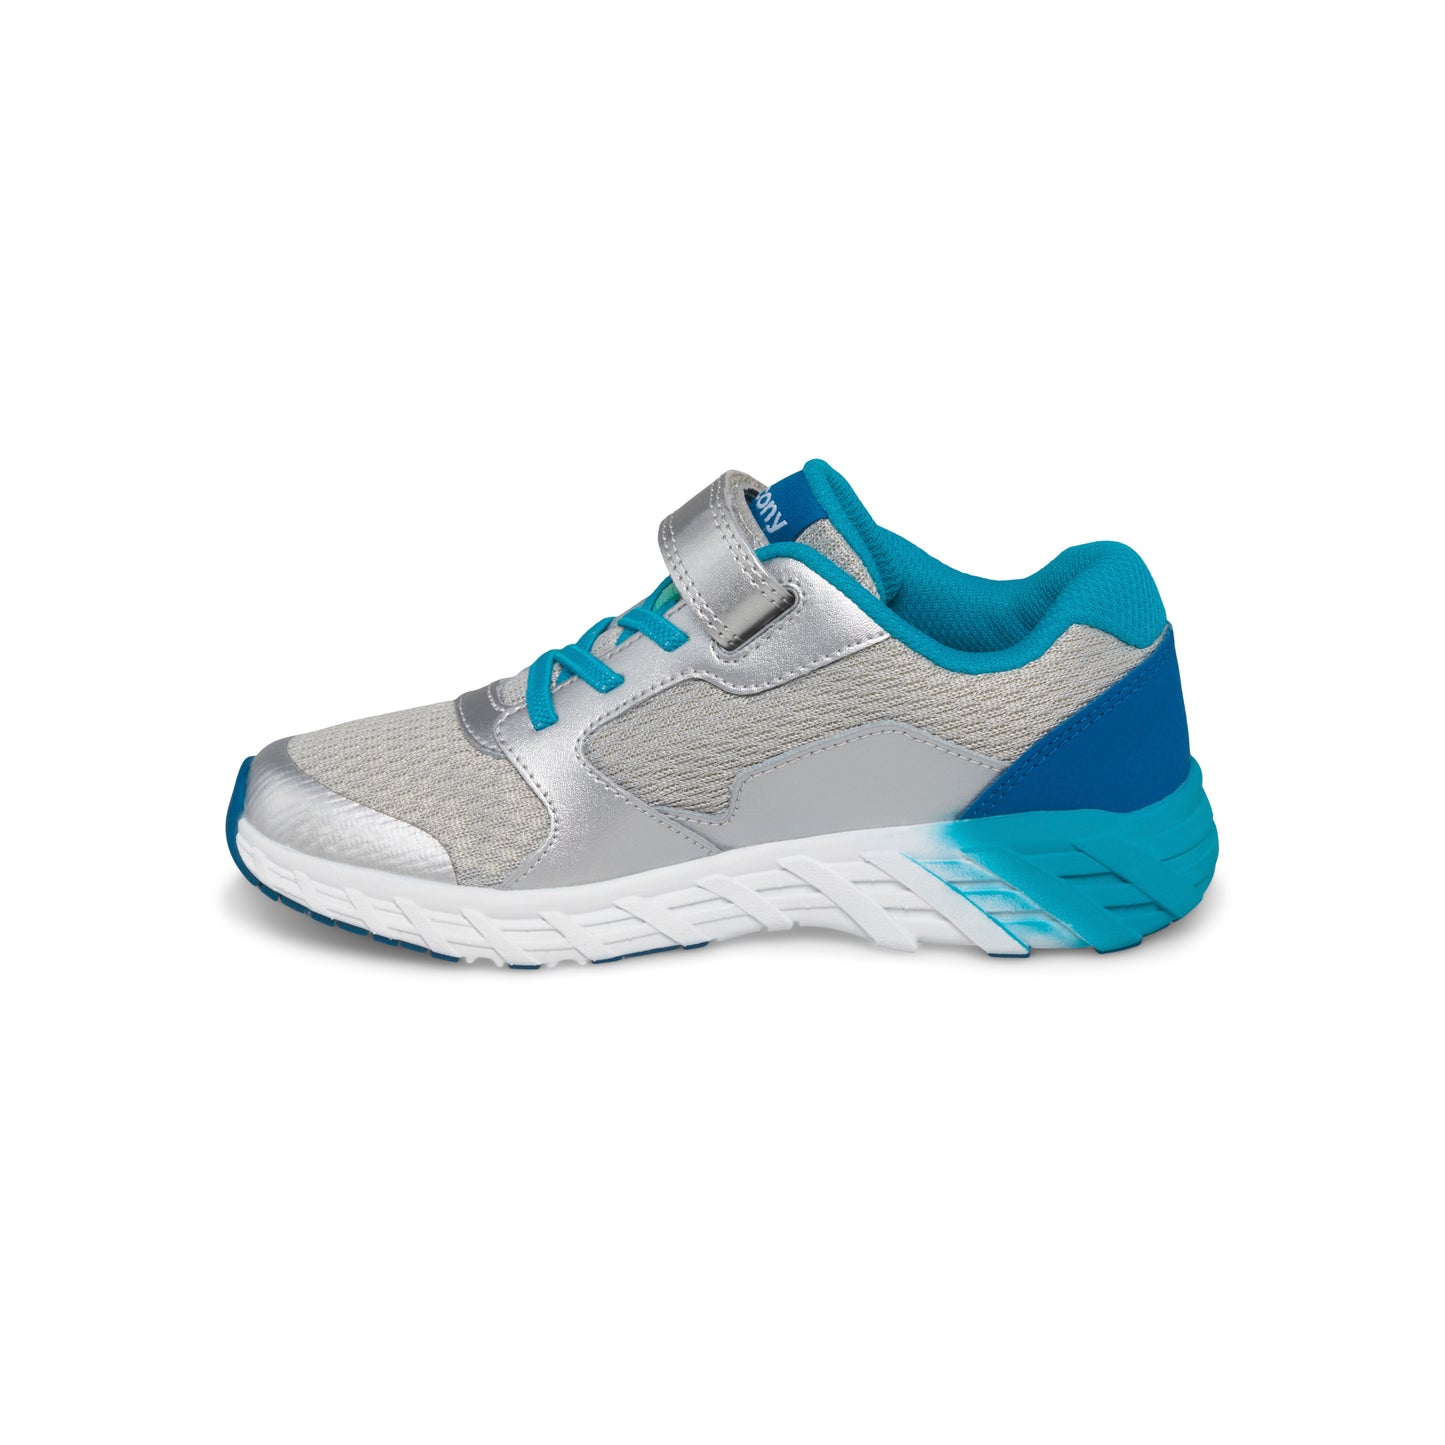 wind-ac-20-sneaker-bigkid-turquoise-silver__Turquoise/Silver_4